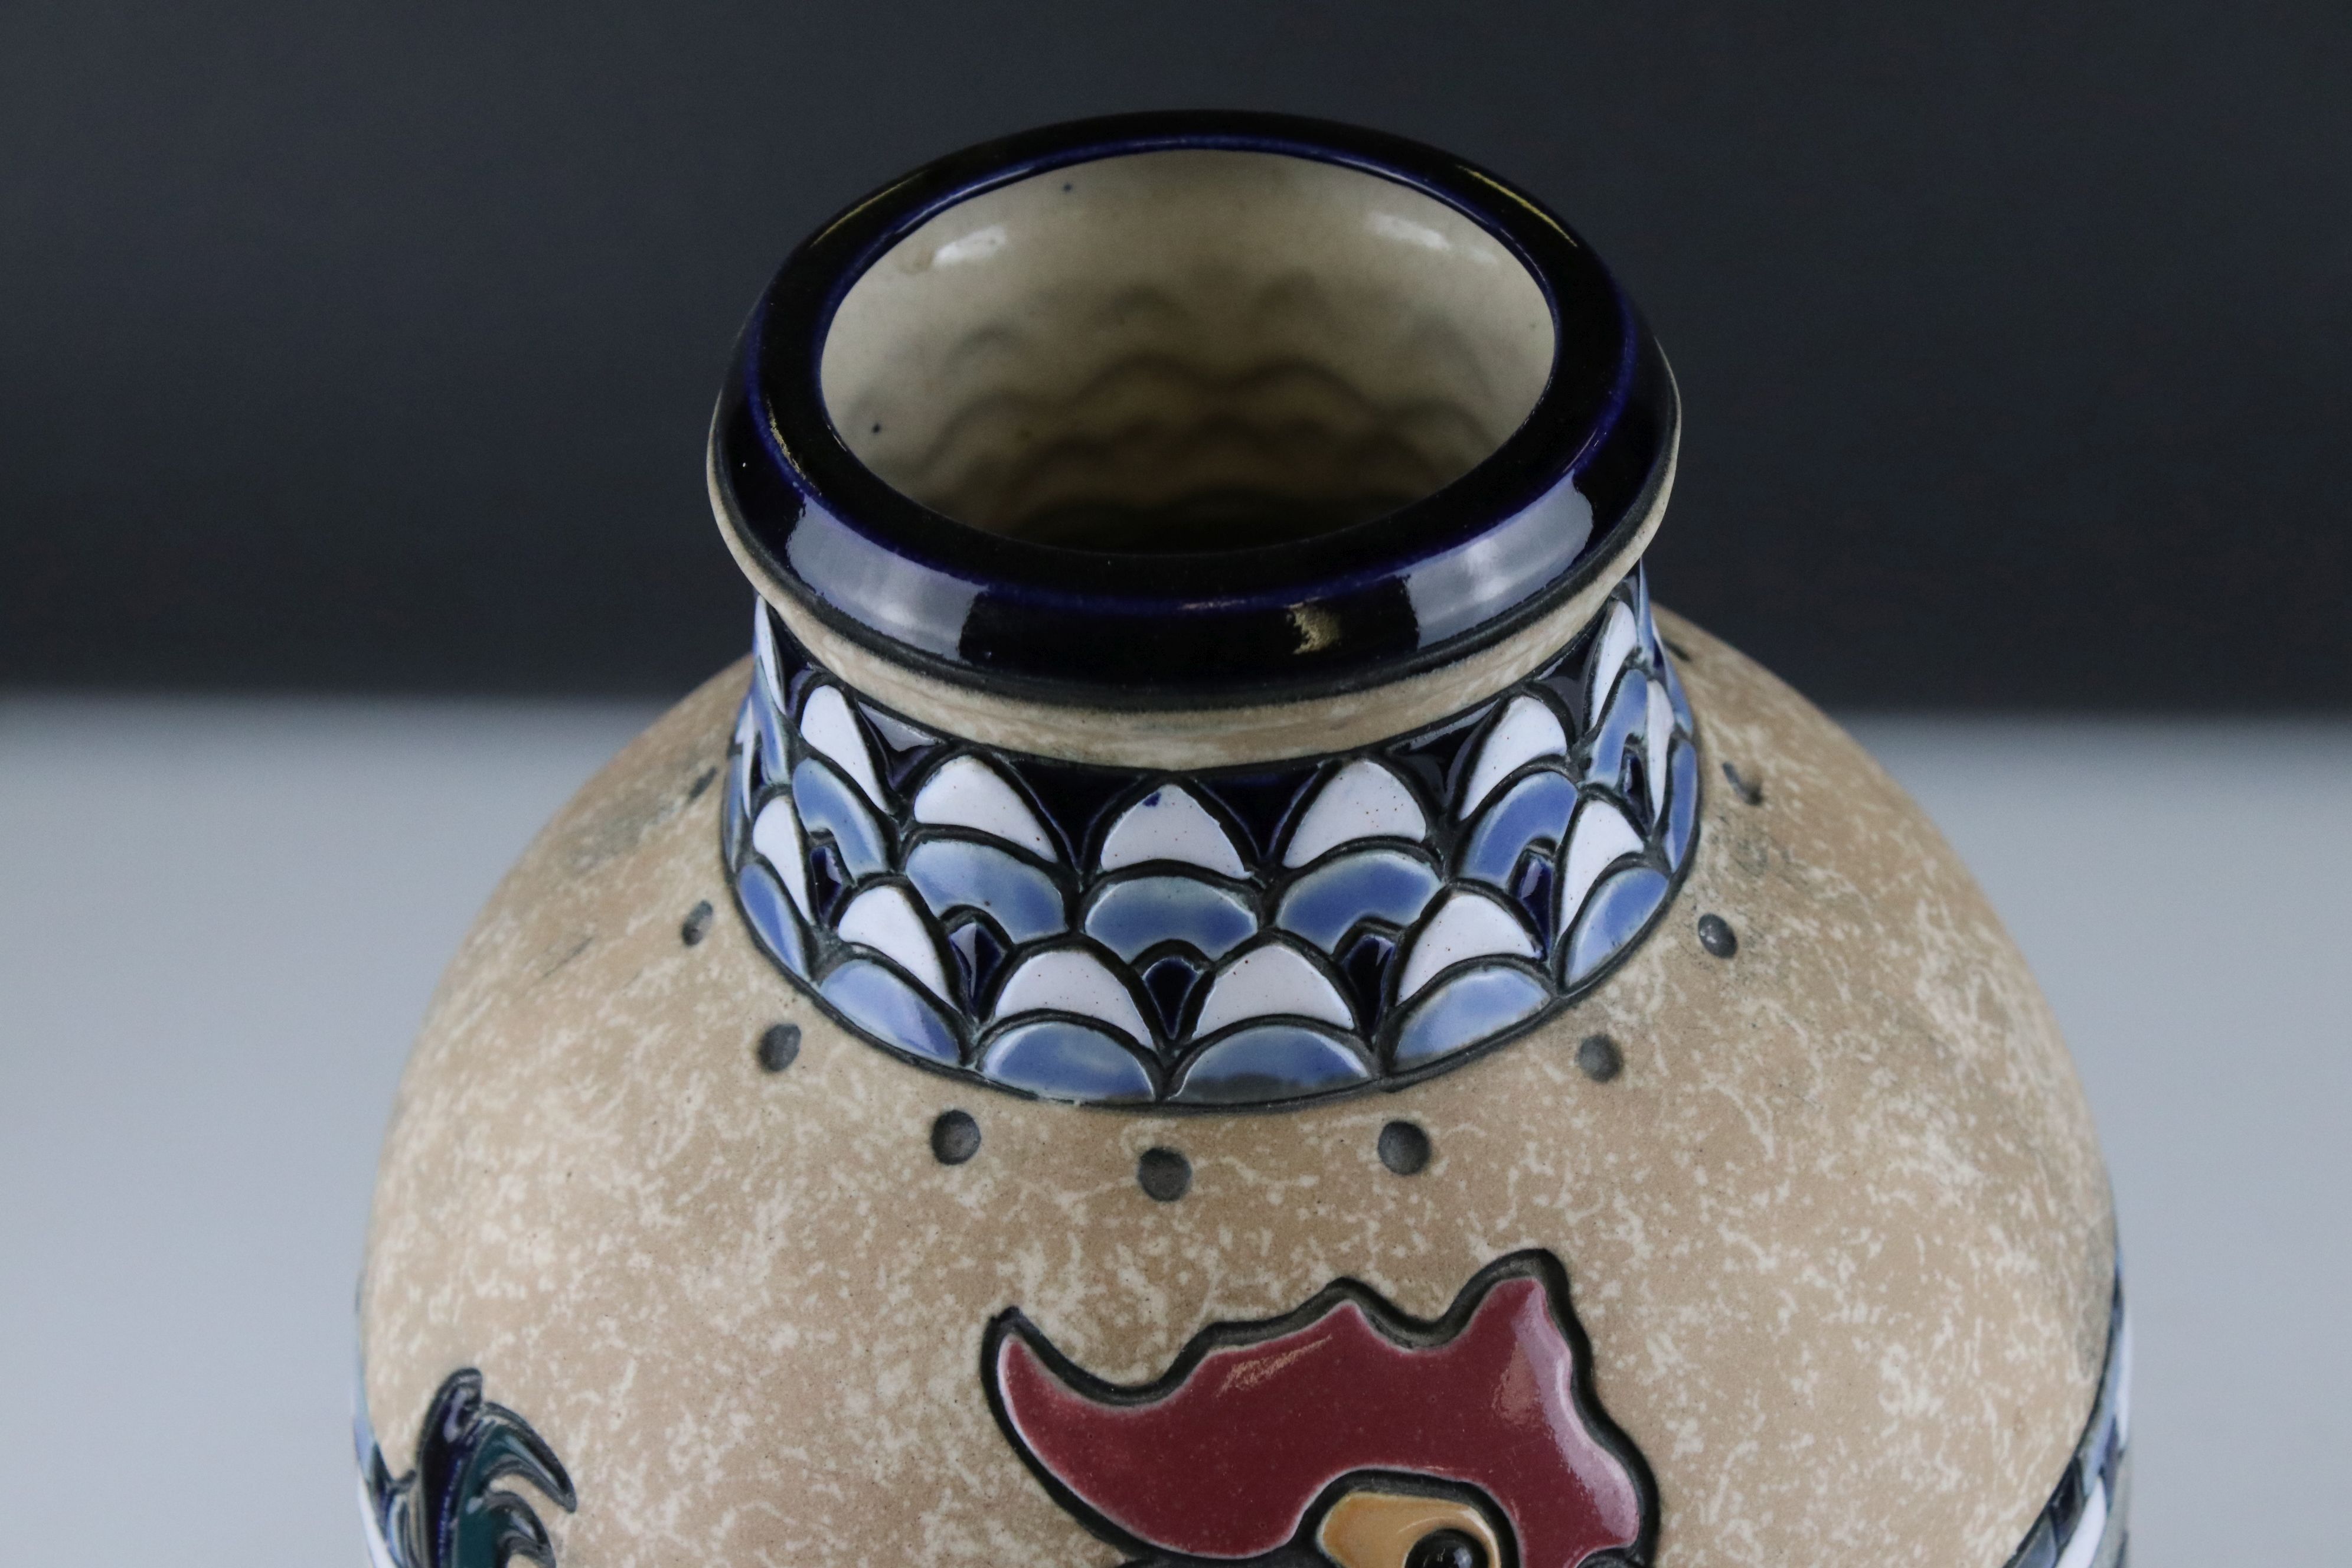 Amphora Pottery Vase with Cockerel / Rooster design, 36cms high - Image 3 of 6